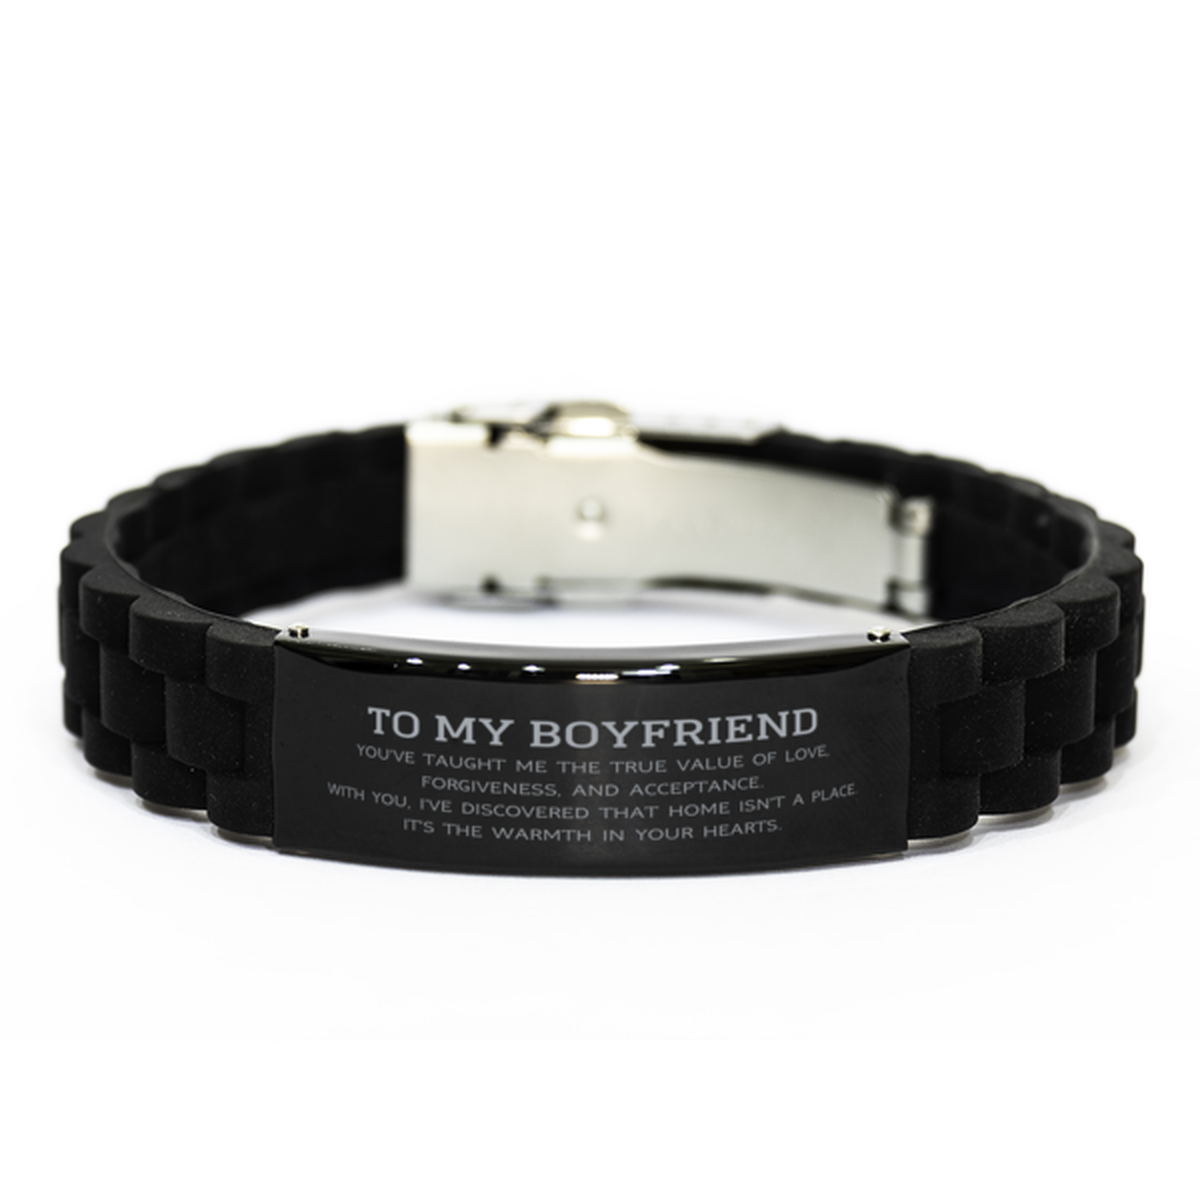 To My Boyfriend Gifts, You've taught me the true value of love, Thank You Gifts For Boyfriend, Birthday Black Glidelock Clasp Bracelet For Boyfriend